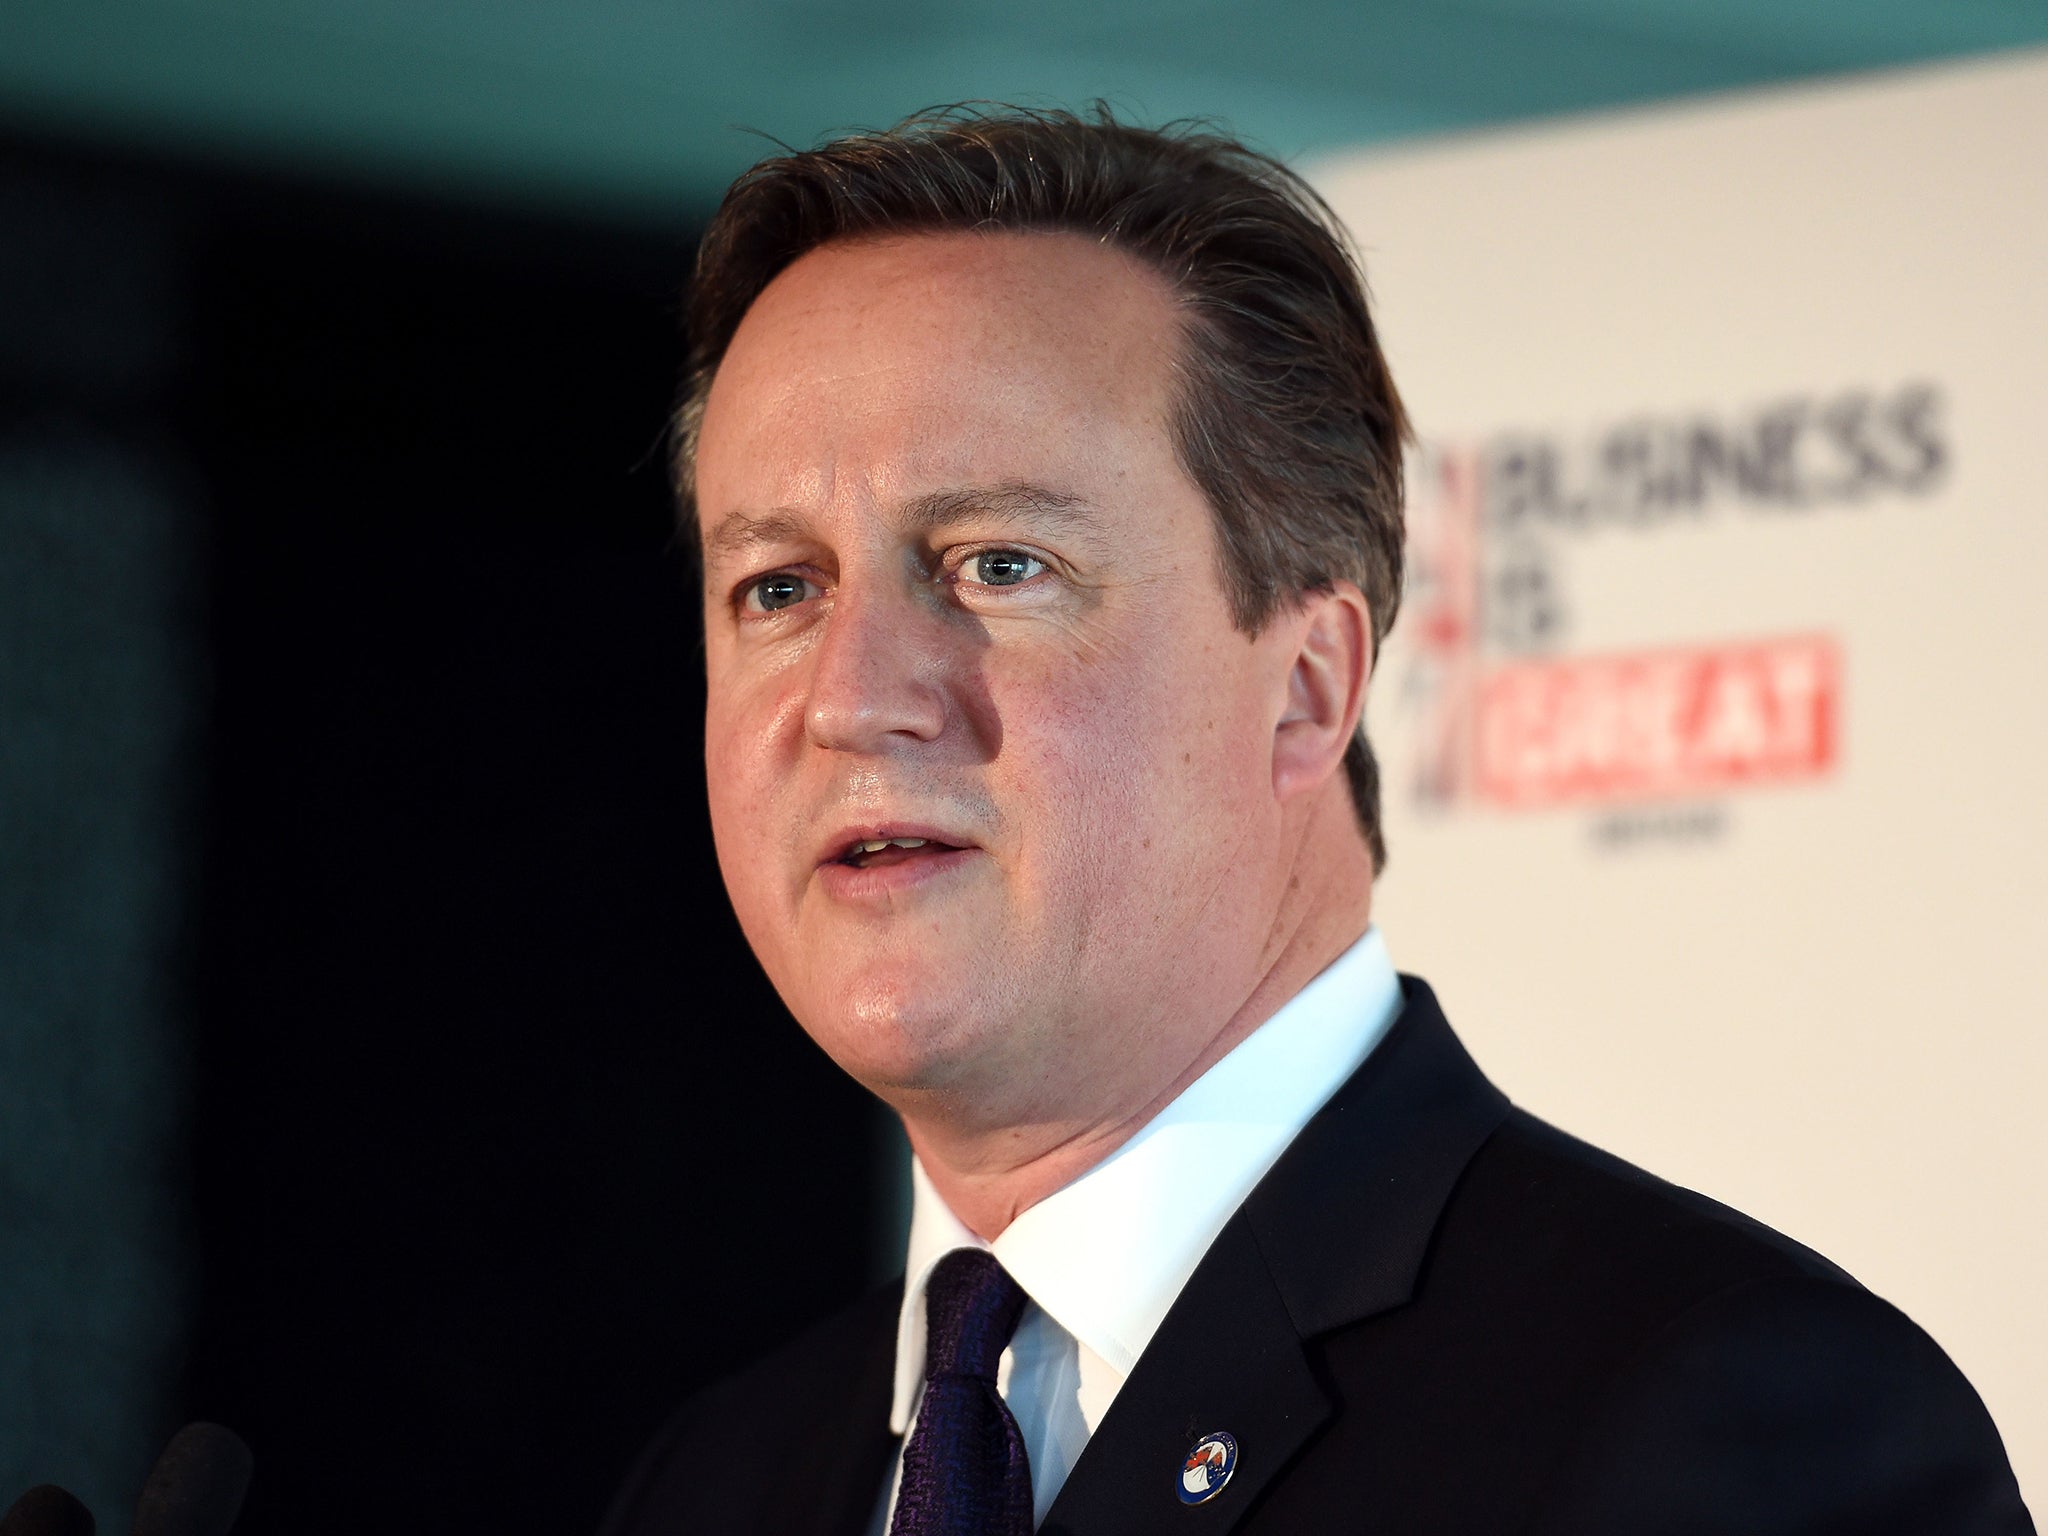 David Cameron has been snubbed by Bermuda - most important of the UK’s oversea territories